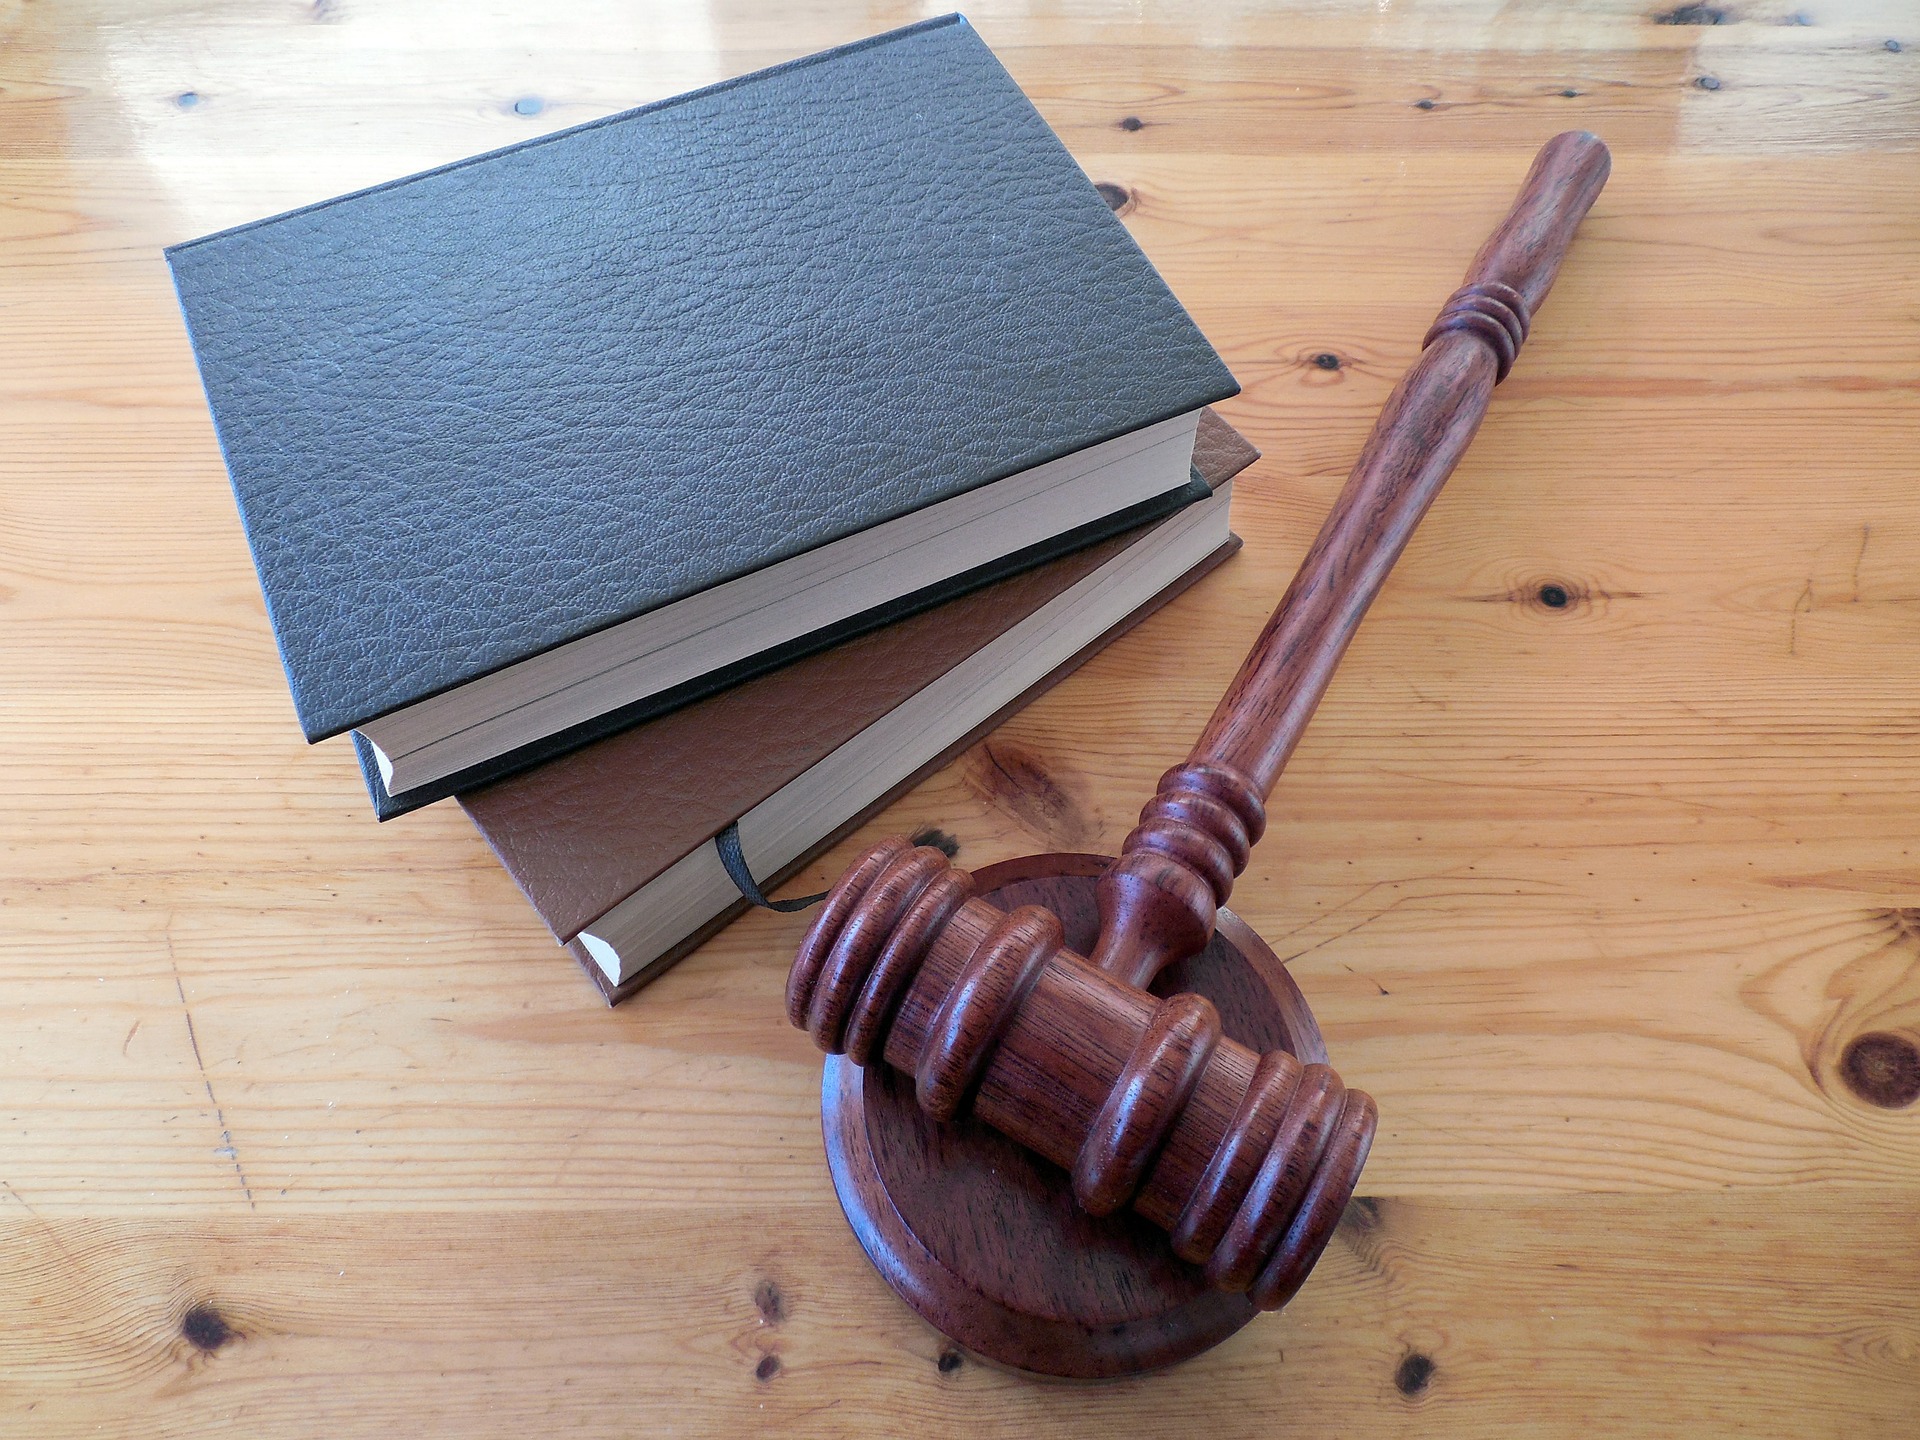 A wooden gavel rests on its sound block on a polished wooden table, next to three stacked books with leather-like covers. The scene suggests themes of law, justice, and legal proceedings.